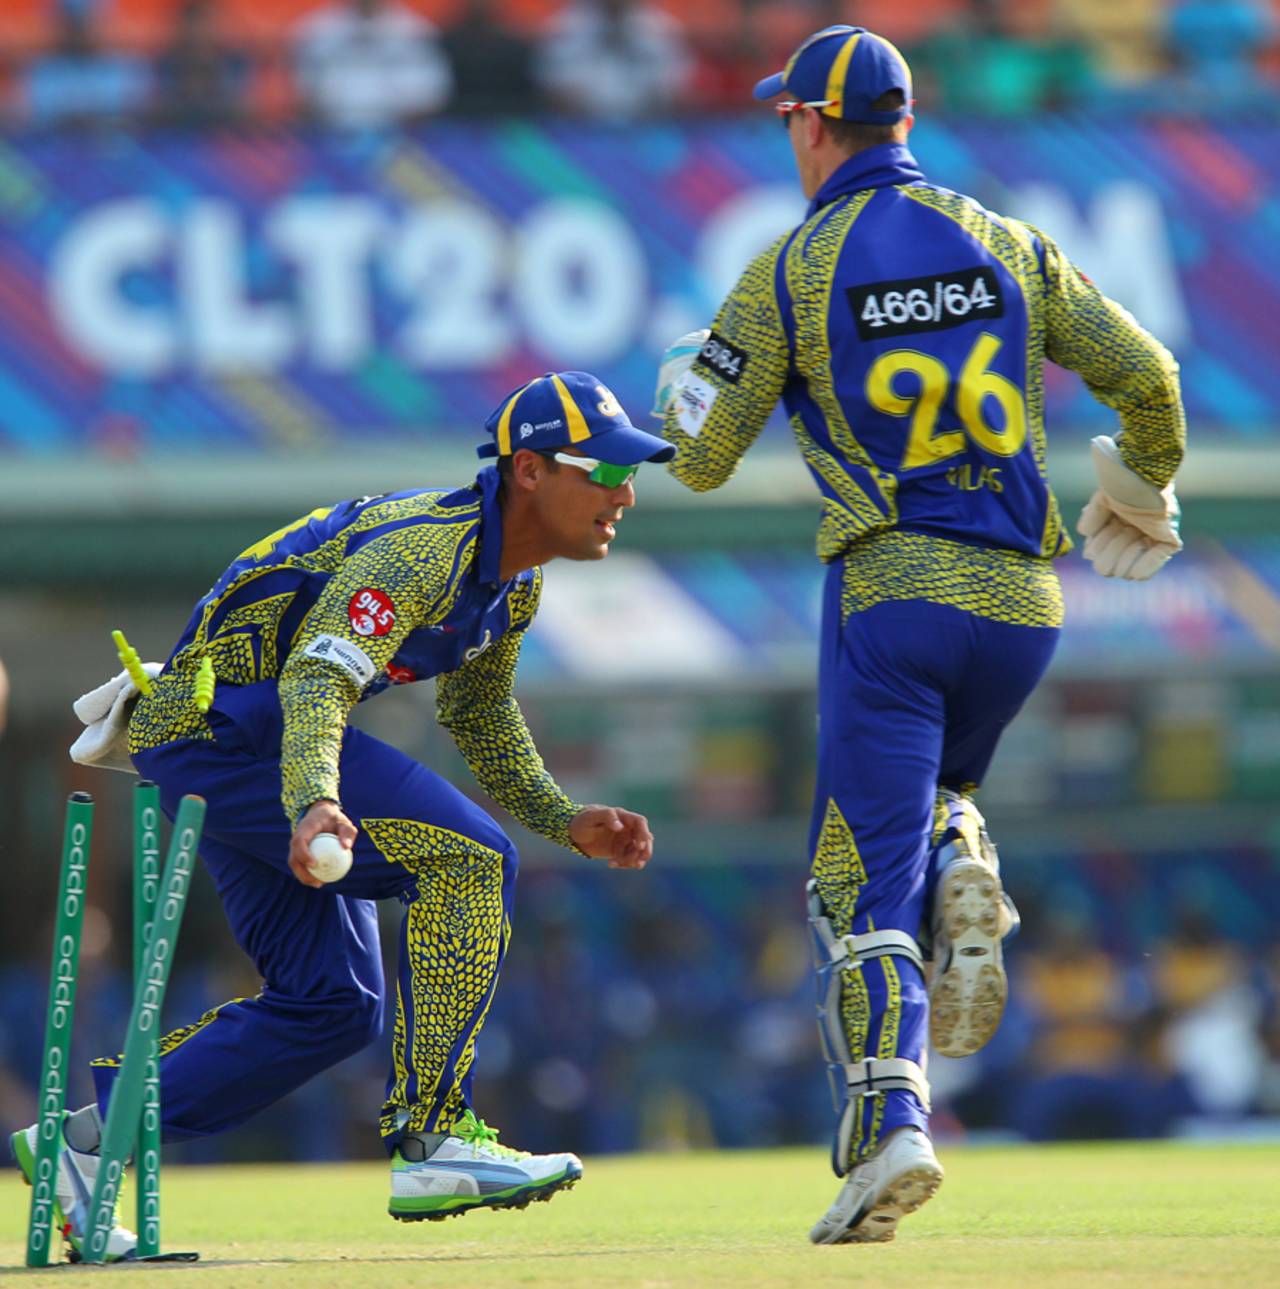 File photo - Justin Ontong's fielding exploits helped clinch a championship run for Cape Cobras in South Africa's domestic T20 final&nbsp;&nbsp;&bull;&nbsp;&nbsp;BCCI